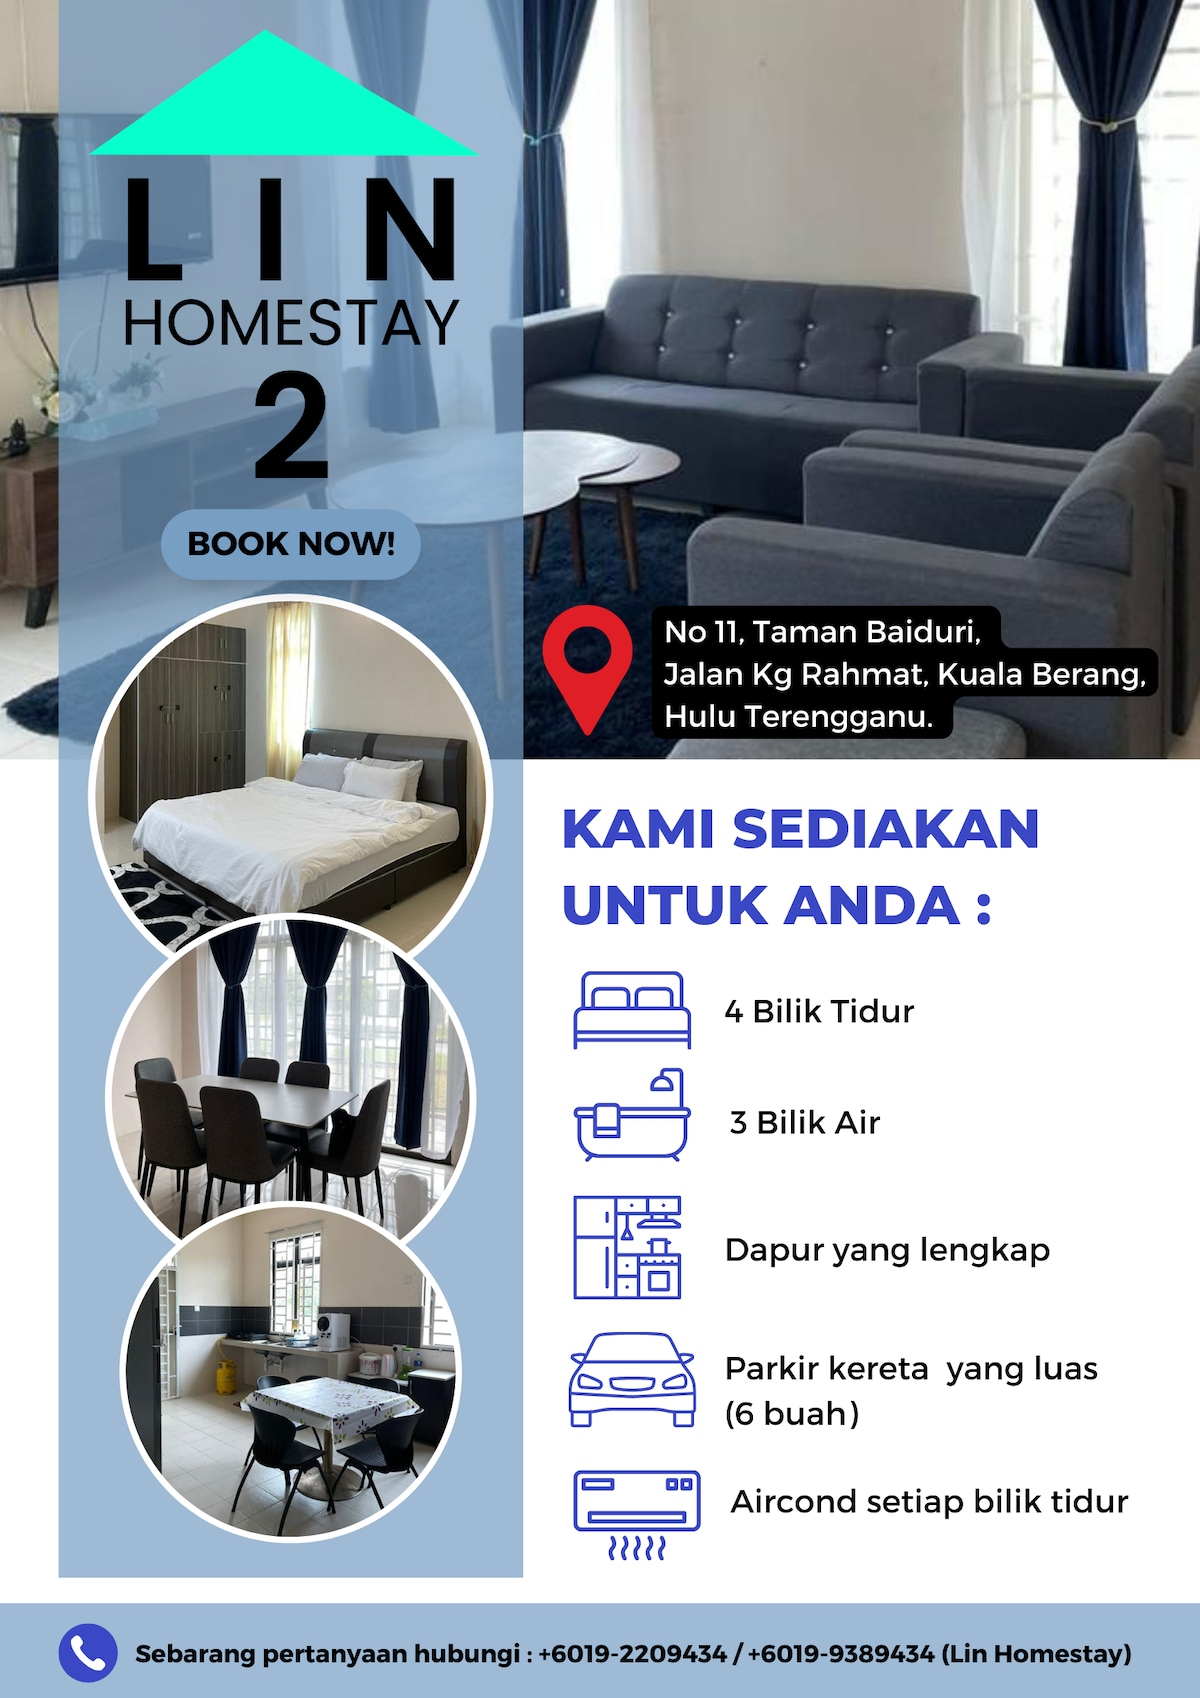 Your Homestay Haven